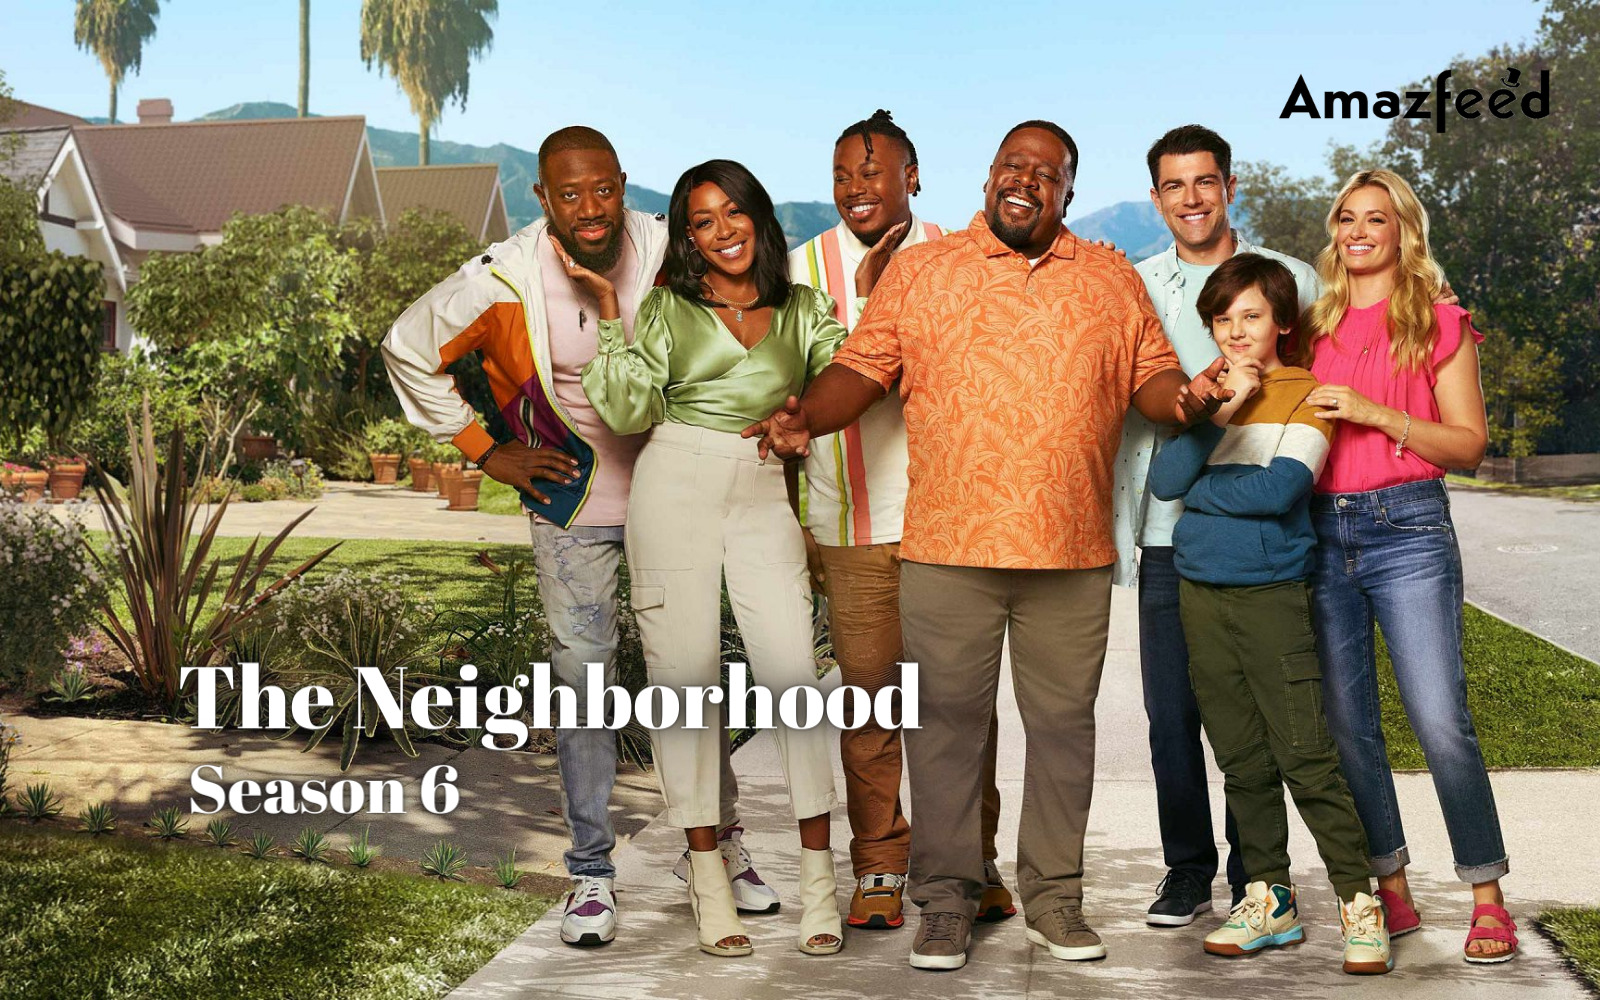 The Neighborhood Season 6: The Neighborhood Season 6: See what we know  about release date, time, filming, where to watch, cast and more - The  Economic Times